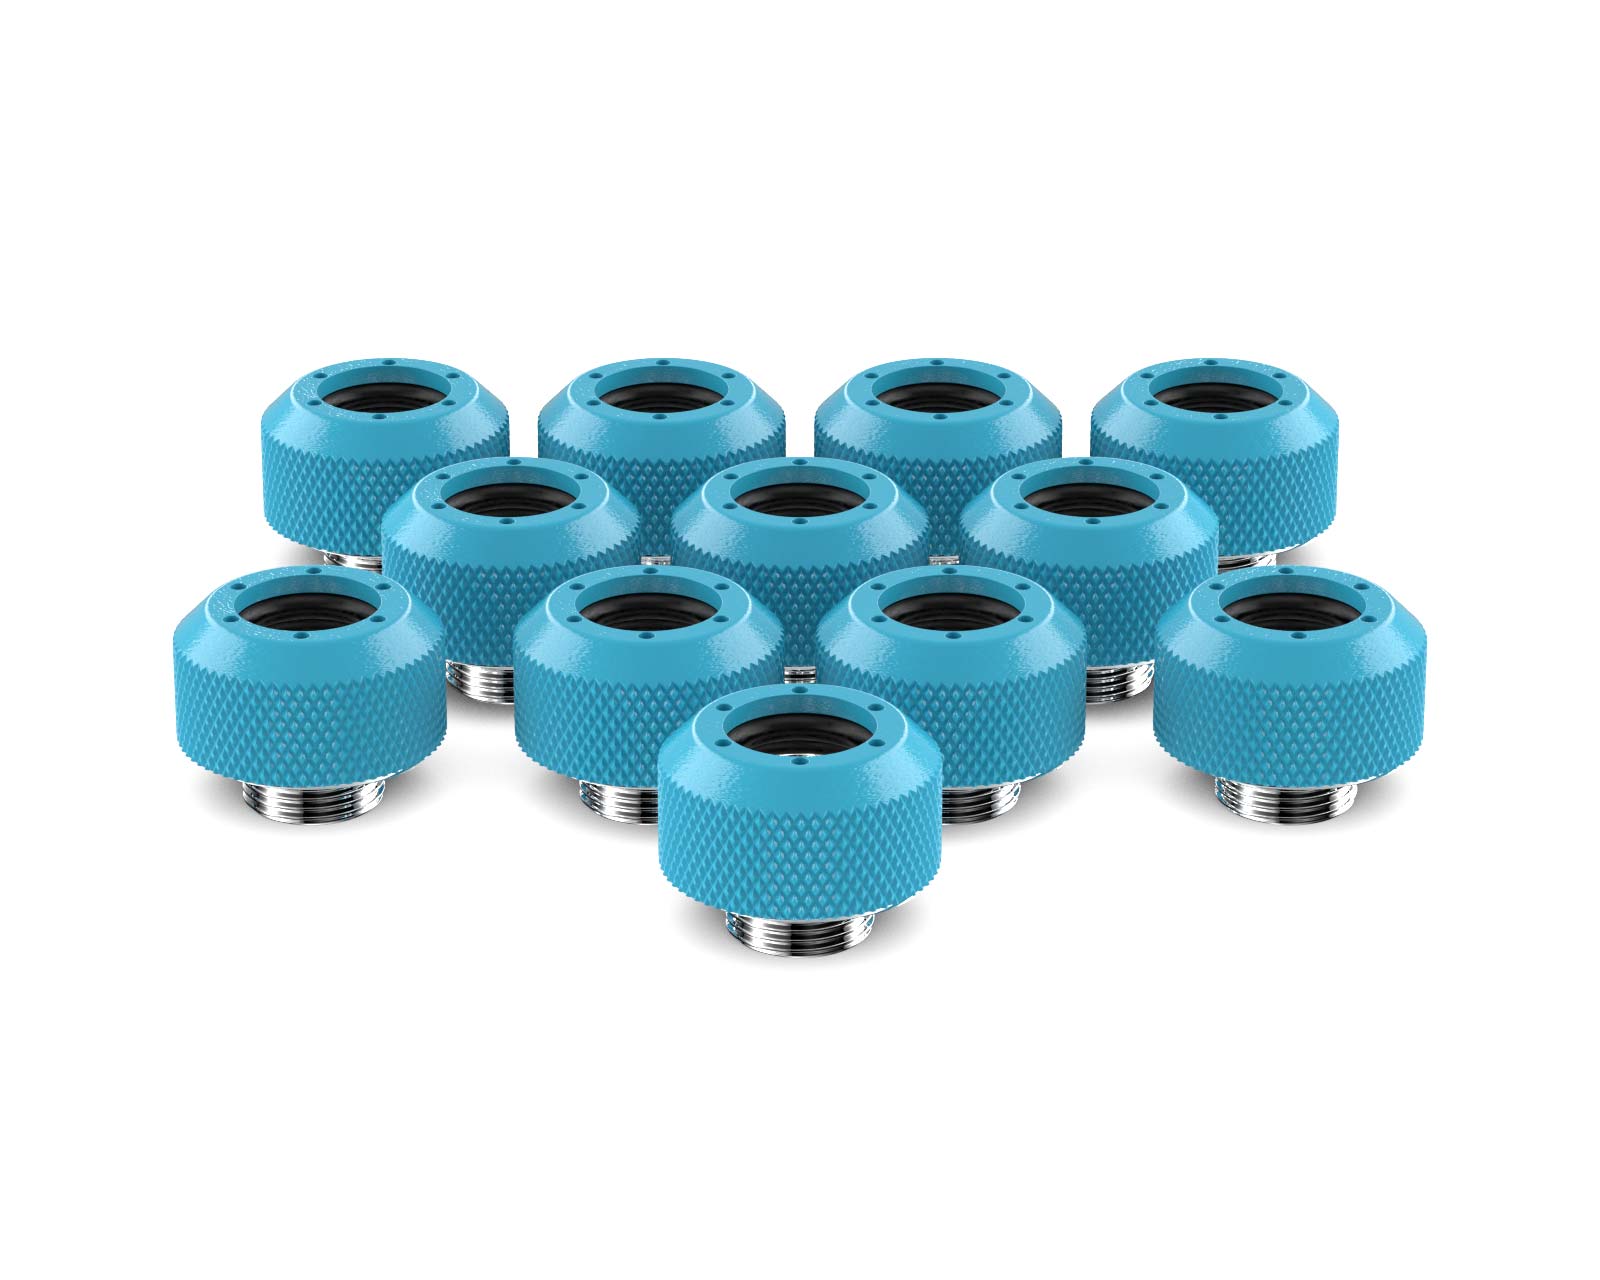 PrimoChill 1/2in. Rigid RevolverSX Series Fitting - 12 pack - PrimoChill - KEEPING IT COOL Sky Blue